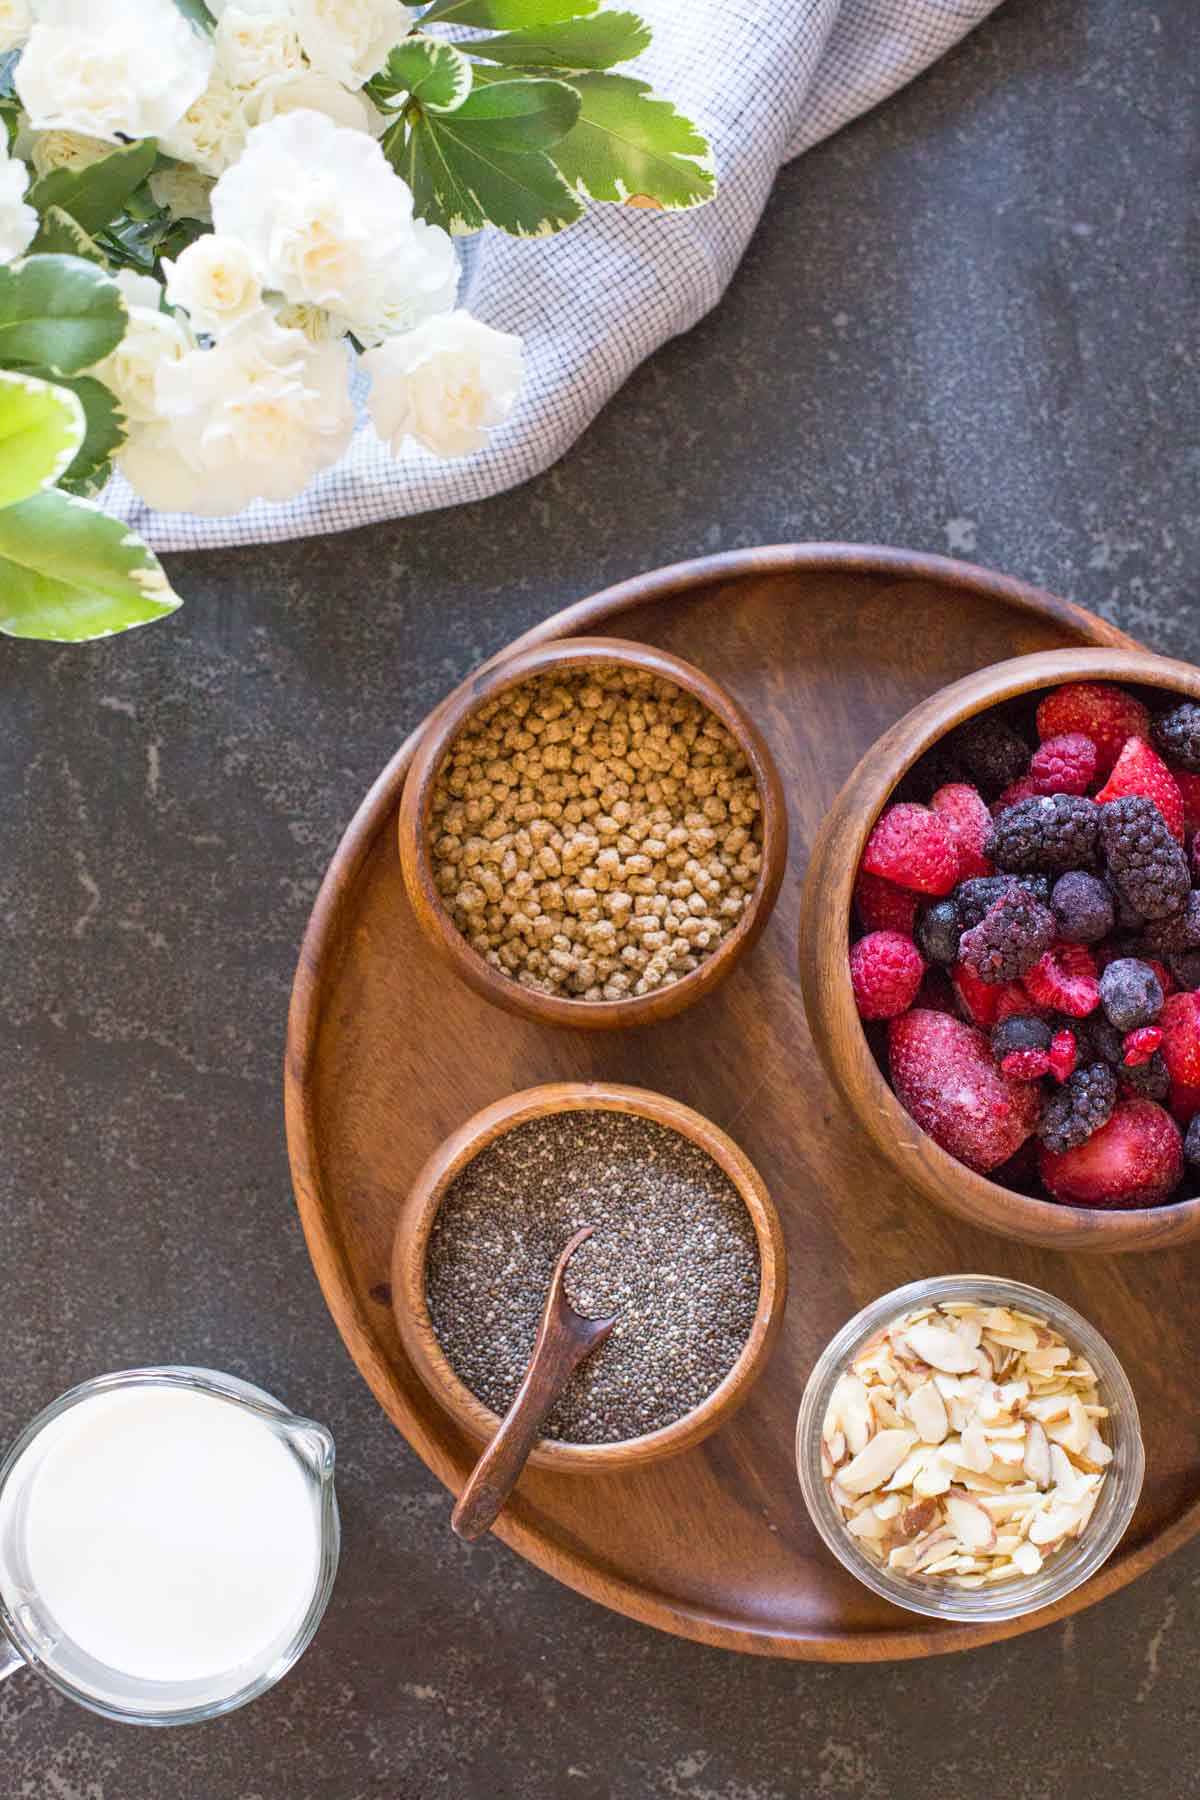 All the ingredients for the Chia Pudding Parfaits - A wood plate with a small wood bowl of bran nuggets, a small wood bowl of chia seeds, a small glass dish of sliced almonds, and a wood bowl of frozen mixed berries, sitting next to a small pour cup of milk.